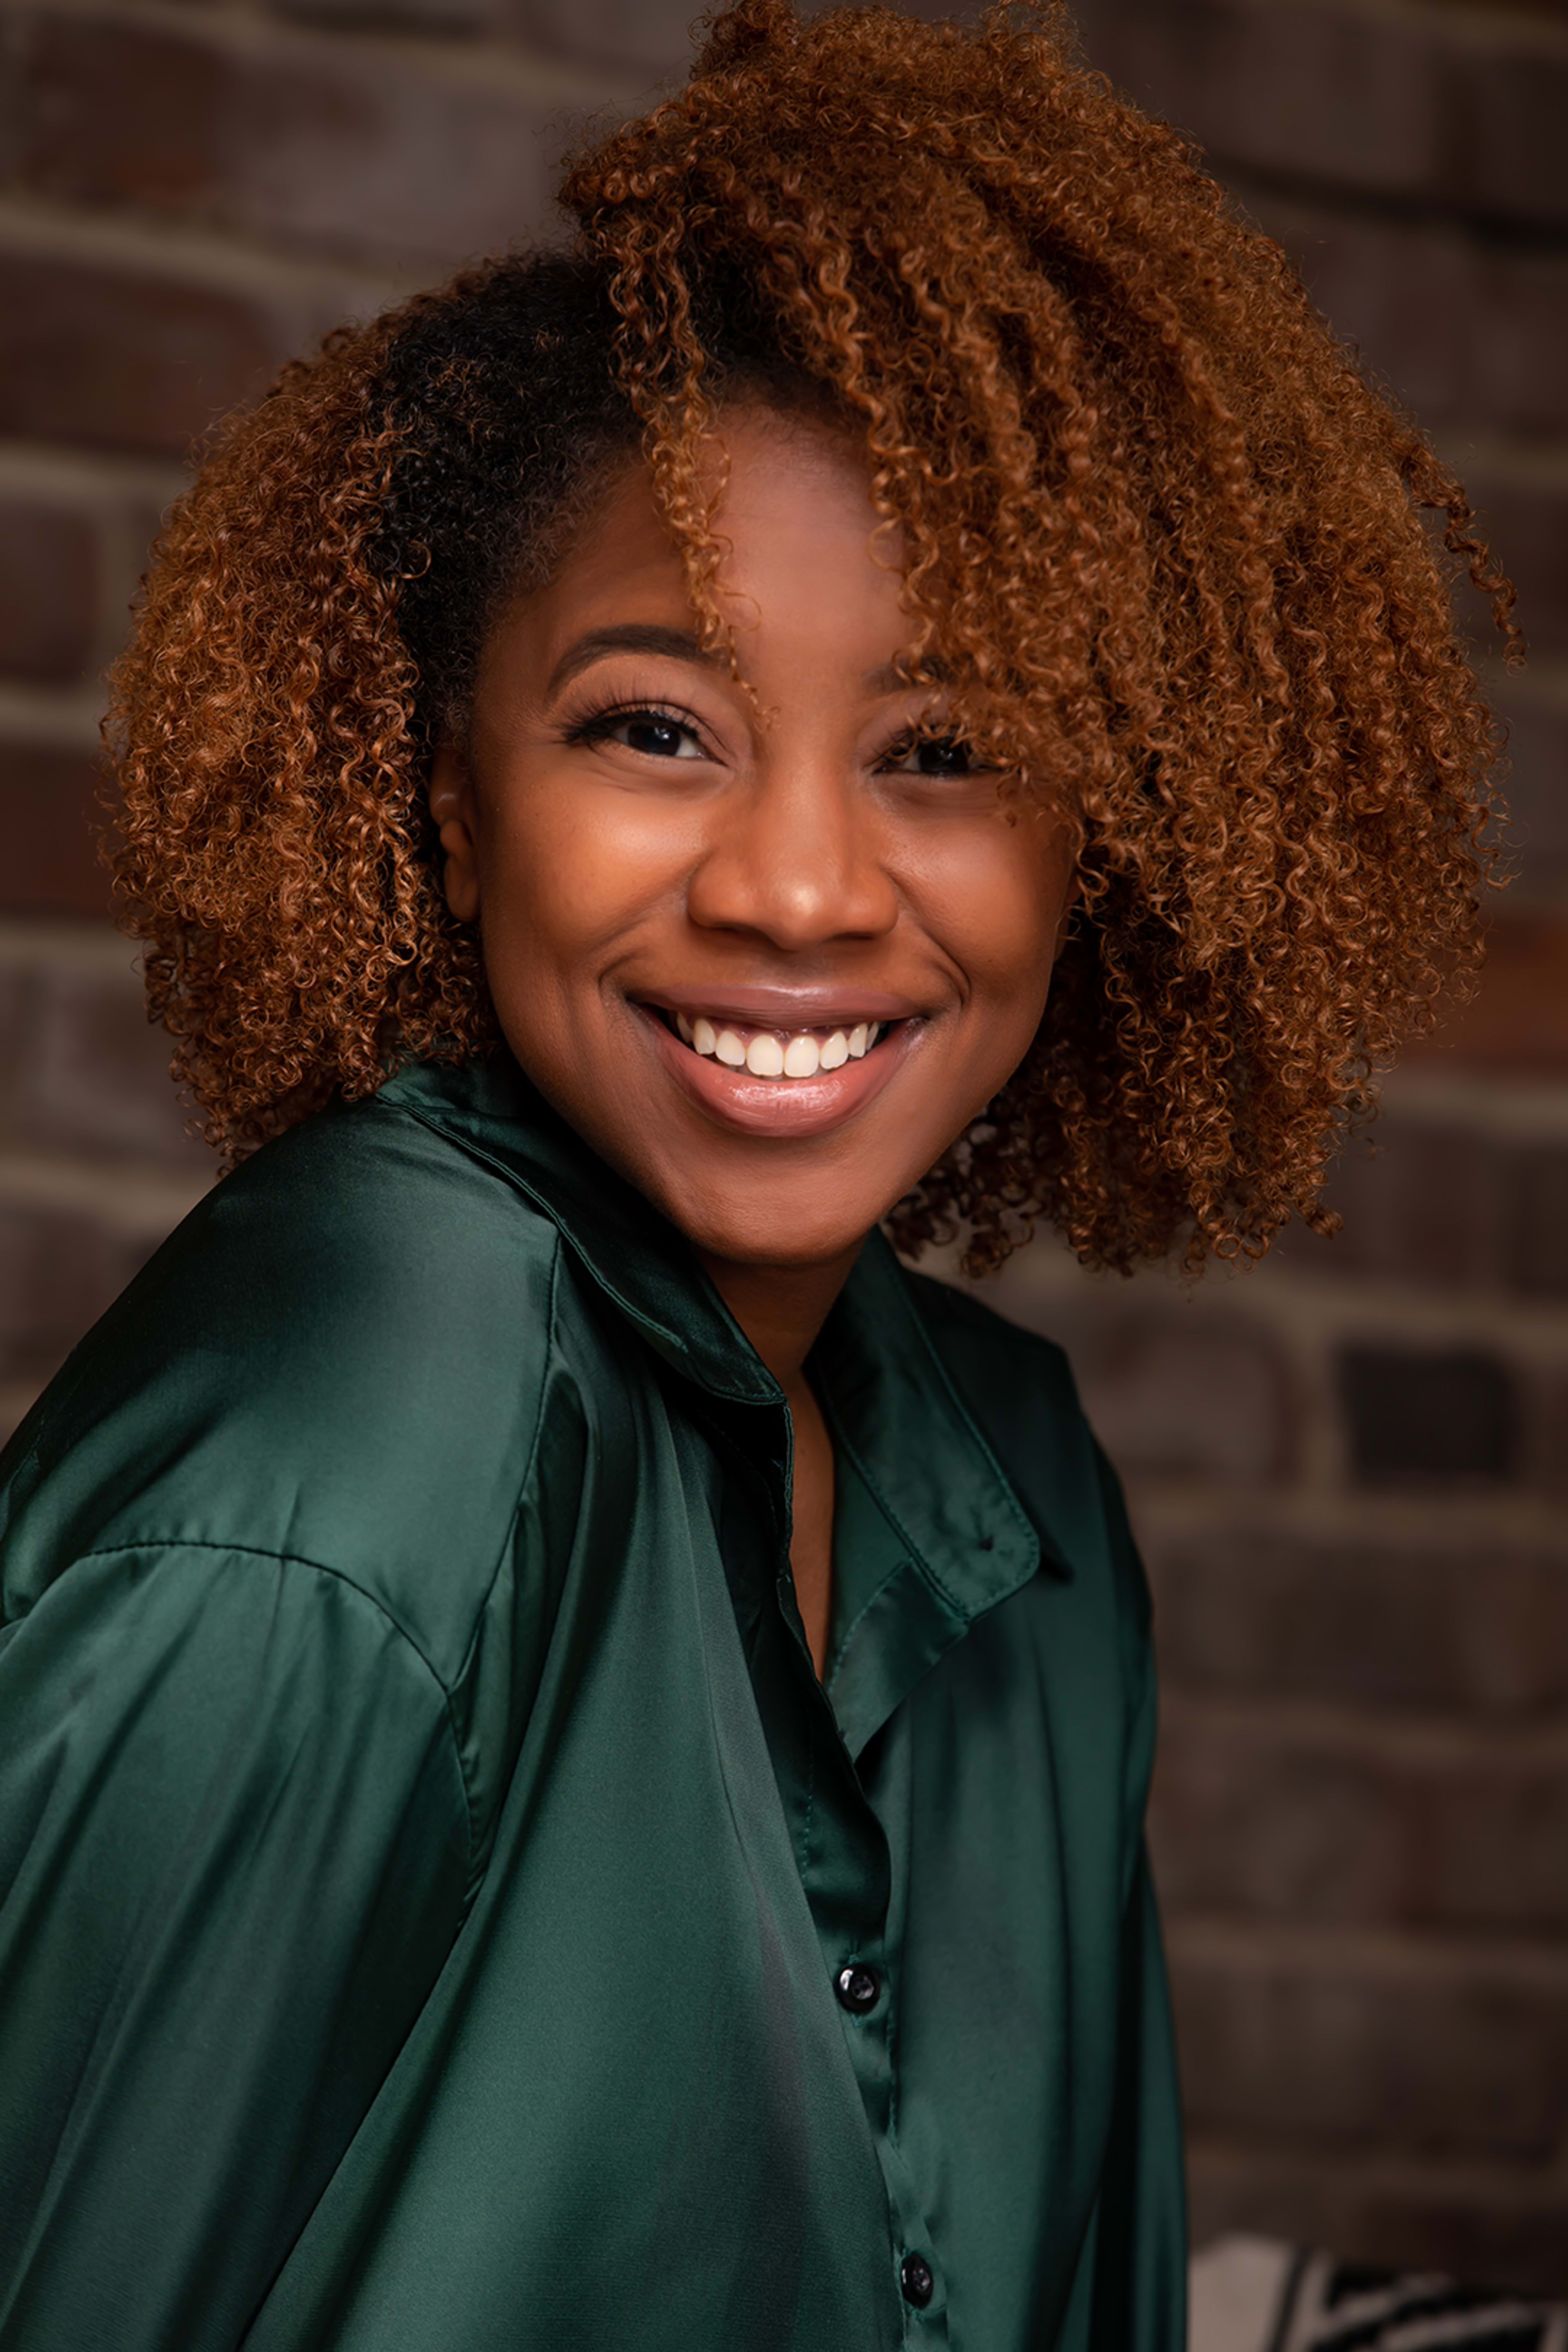 A woman with curly hair smiling for the camera for a portrait photo shoot.